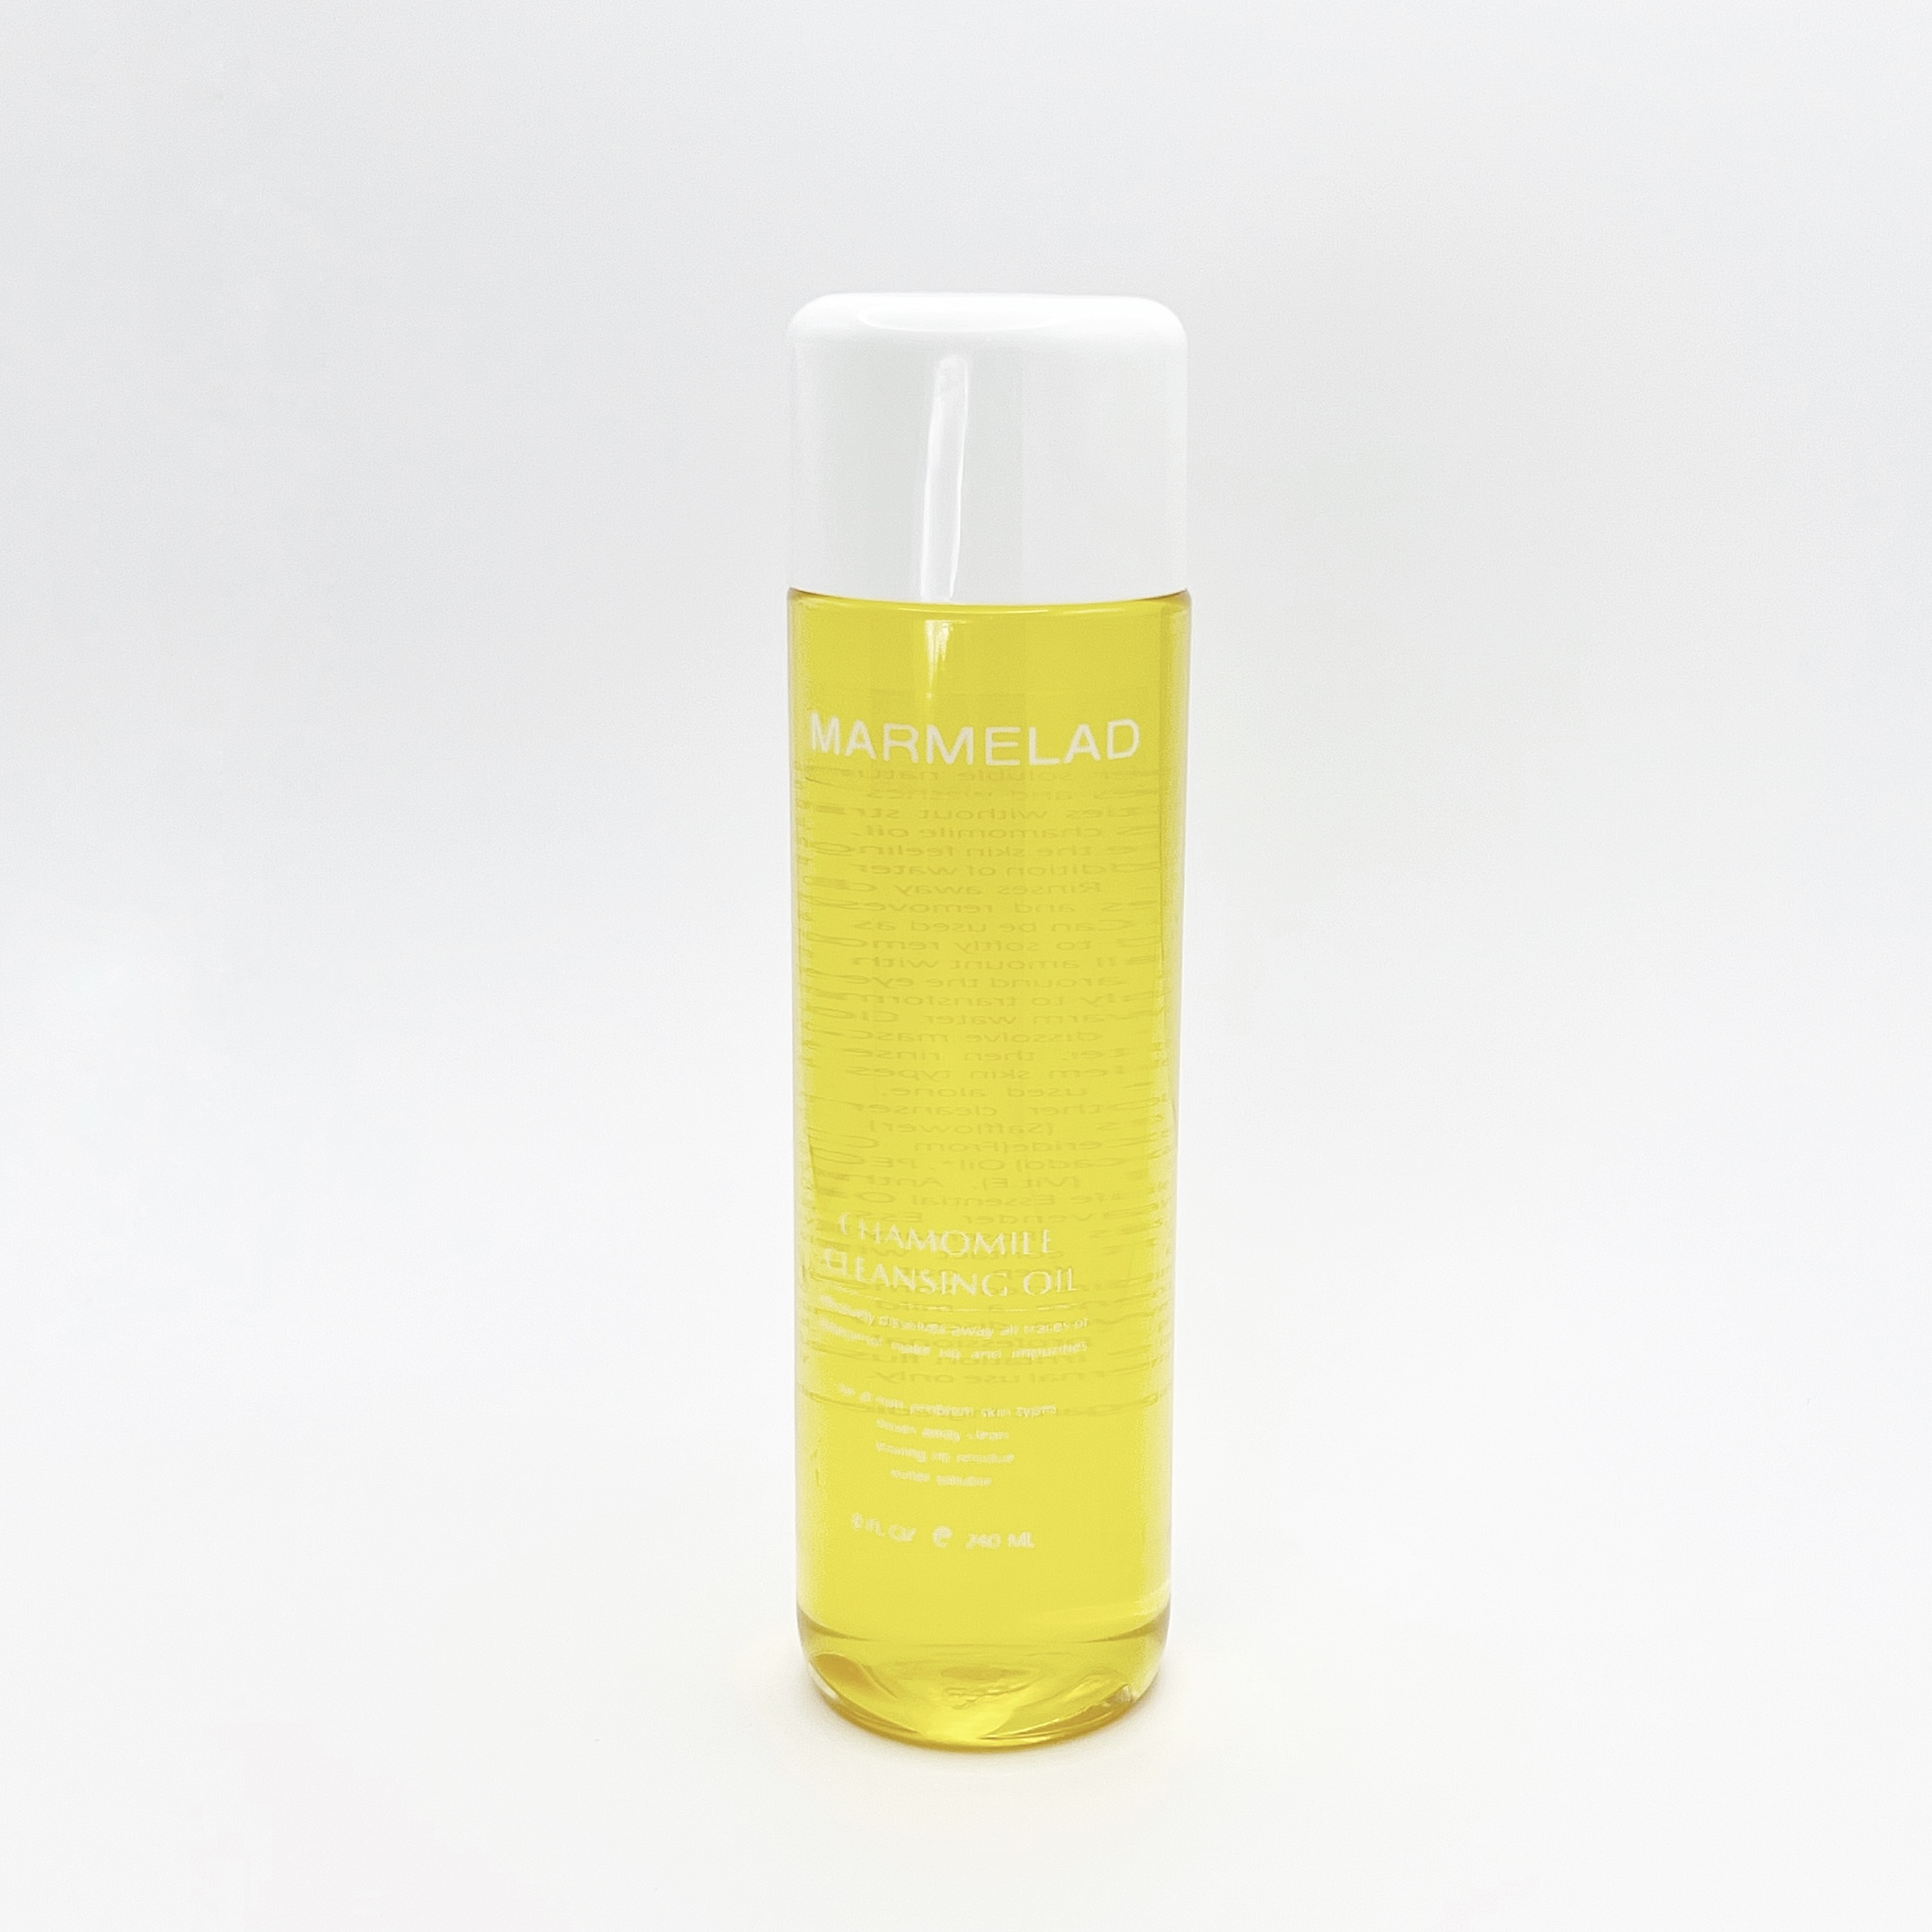 CHAMOMILE CLEANSING OIL 240 ml